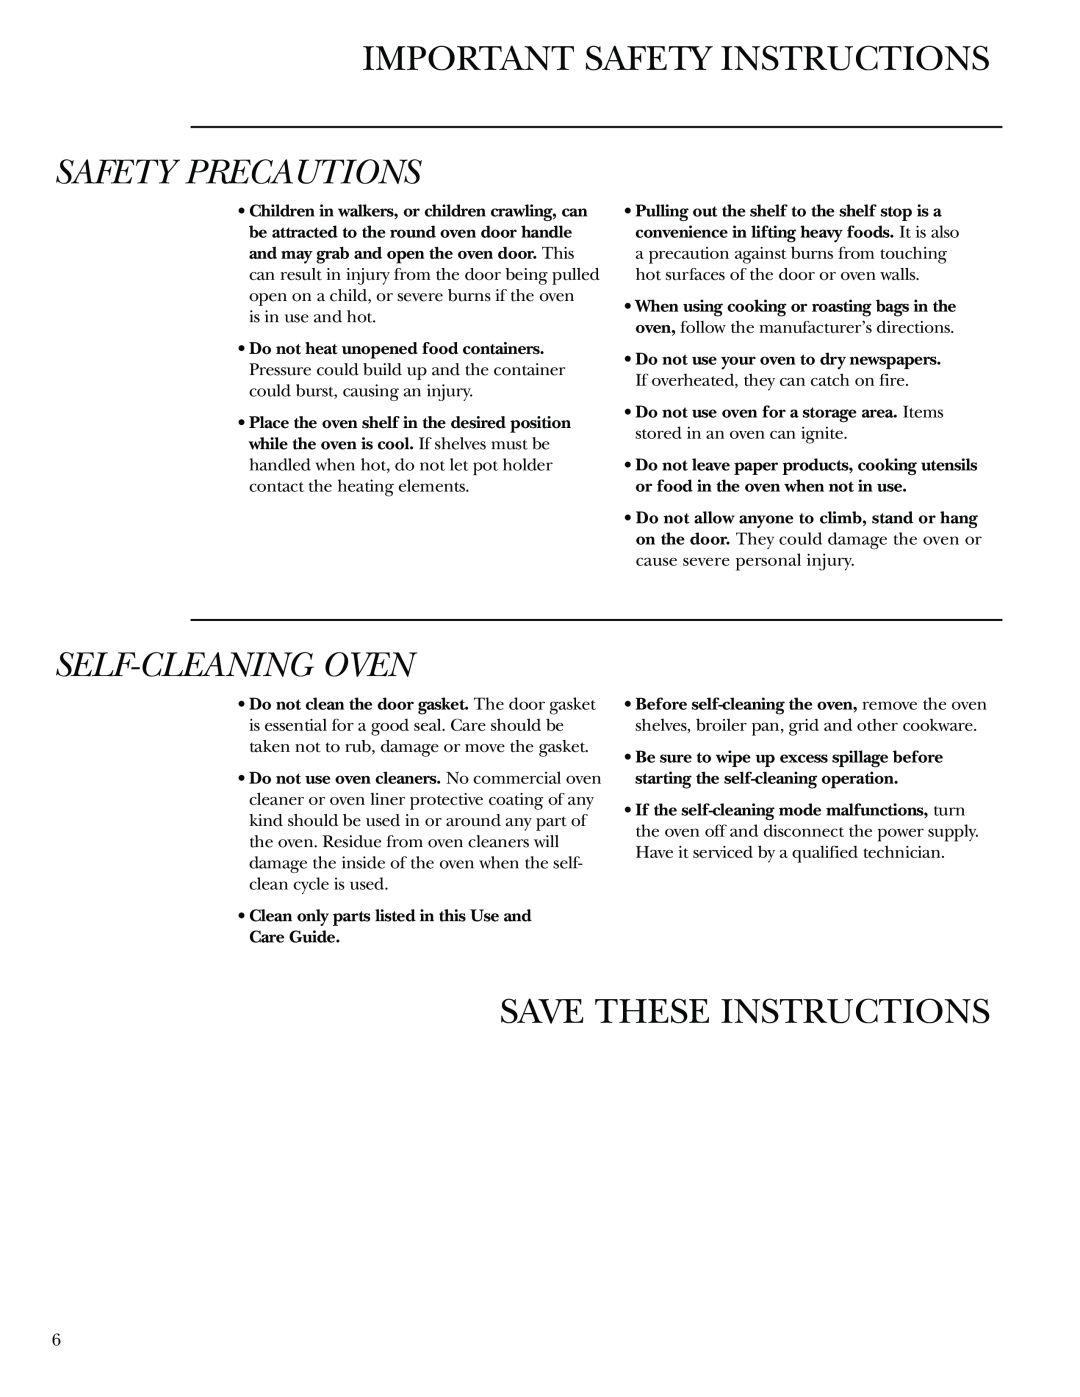 GE Monogram 30 Wall Oven Self-Cleaningoven, Save These Instructions, Important Safety Instructions, Safety Precautions 